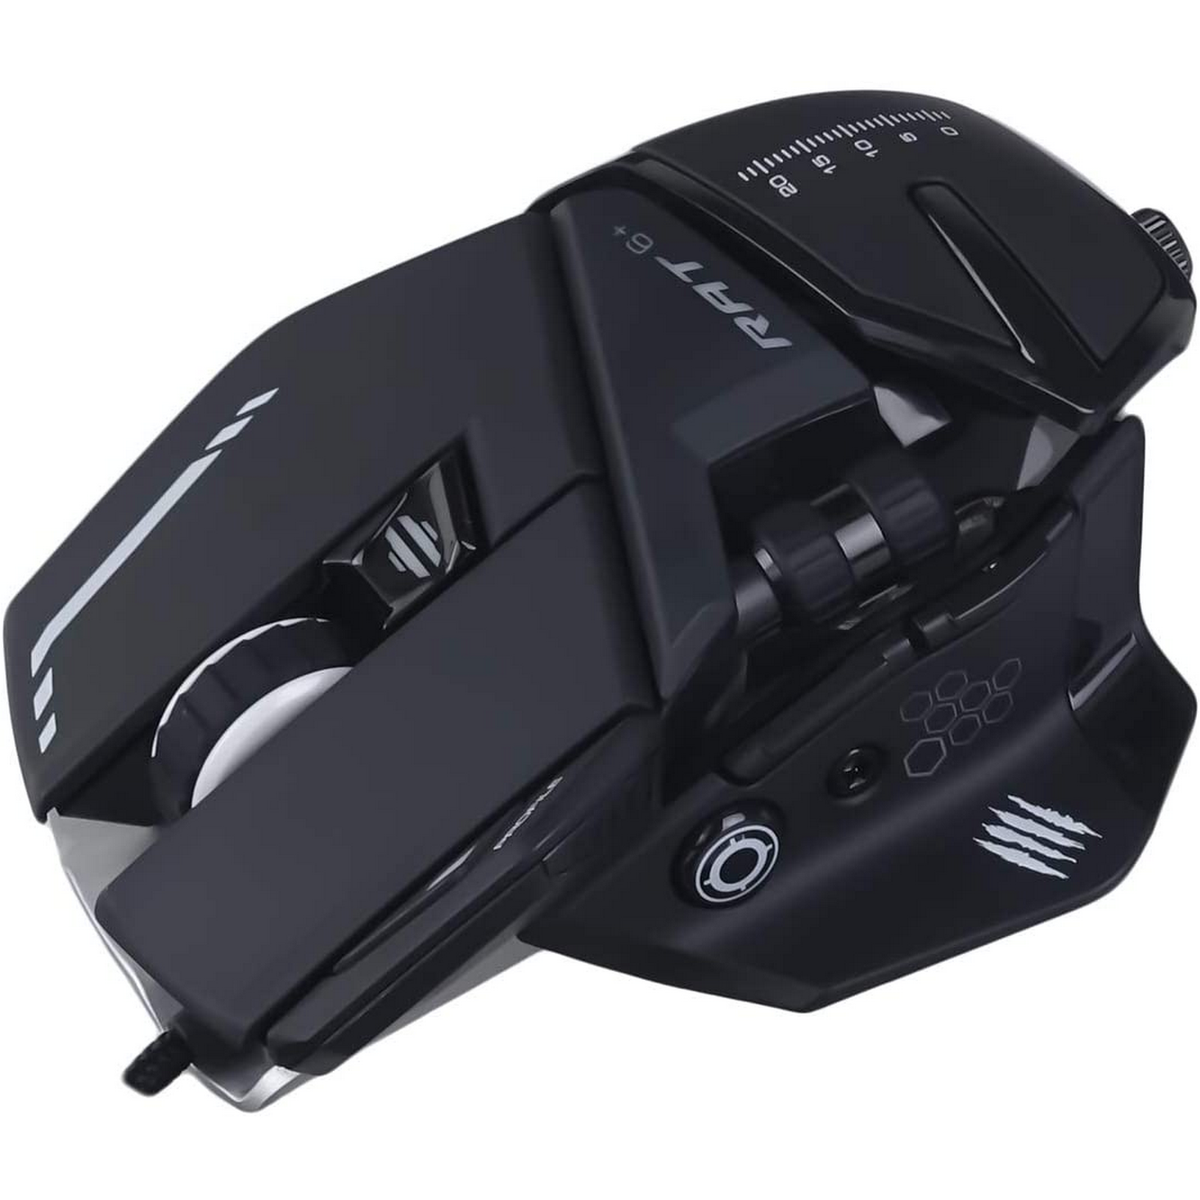 MAD CATZ MR04DCINBL000-0 Schwarz MOUSE, Gaming OPTICAL R.A.T. GAMING Maus, BL 6